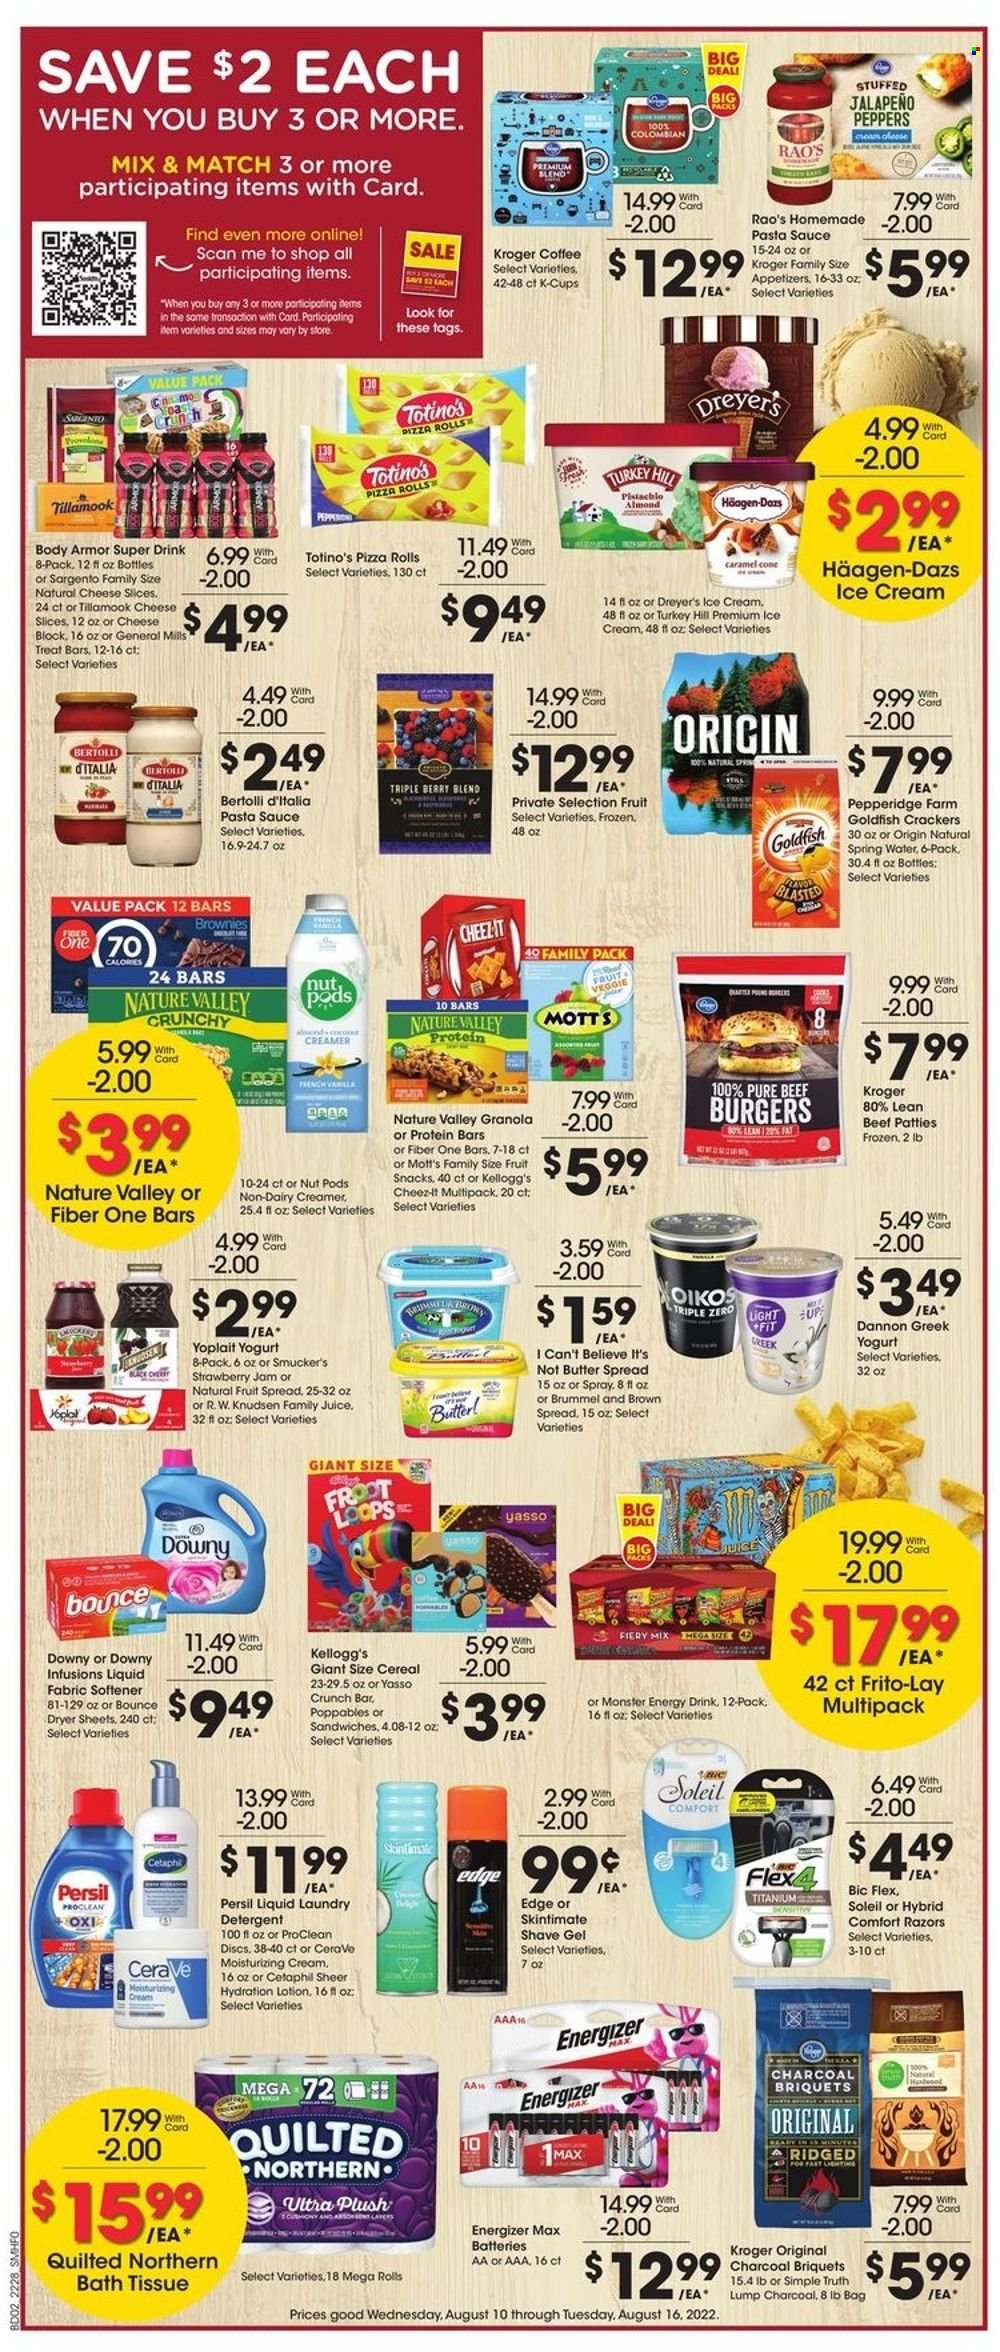 thumbnail - Smith's Flyer - 08/10/2022 - 08/16/2022 - Sales products - pizza rolls, brownies, jalapeño, Mott's, pizza, pasta sauce, sandwich, hamburger, sauce, beef burger, Bertolli, sliced cheese, Sargento, greek yoghurt, yoghurt, Oikos, Yoplait, Dannon, butter, I Can't Believe It's Not Butter, non dairy creamer, creamer, ice cream, Häagen-Dazs, crackers, Kellogg's, fruit snack, Goldfish, Frito-Lay, Cheez-It, strawberry jam, cereals, granola, protein bar, Nature Valley, Fiber One, fruit jam, juice, Body Armor, energy drink, Monster, Monster Energy, spring water, coffee, coffee capsules, K-Cups, beef meat, bath tissue, Quilted Northern, detergent, Persil, fabric softener, laundry detergent, Bounce, dryer sheets, Downy Laundry, CeraVe, body lotion, BIC, shave gel, battery, Energizer, briquettes. Page 2.